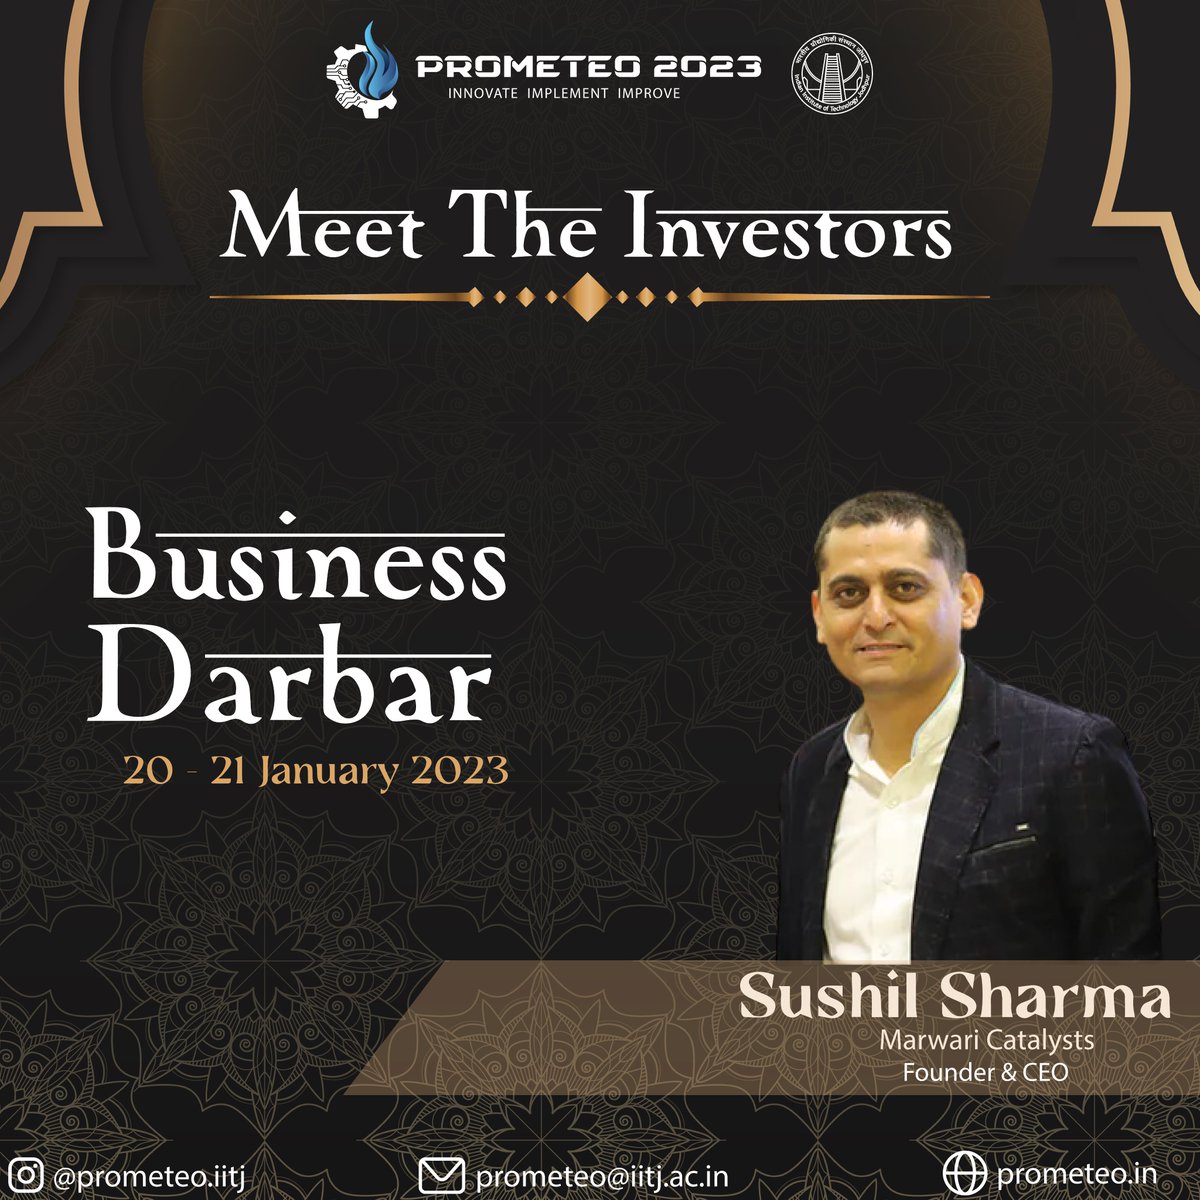 Prometeo '23, IIT Jodhpur is pleased to announce Mr. Sushil Sharma, Founder and CEO of Marwari Catalysts as an investor for our flagship pitching event Business Darbar.

#prometeo #iitjodhpur #business #investment #investor #marwaricatalysts #techfest #startup #finance #sharktank